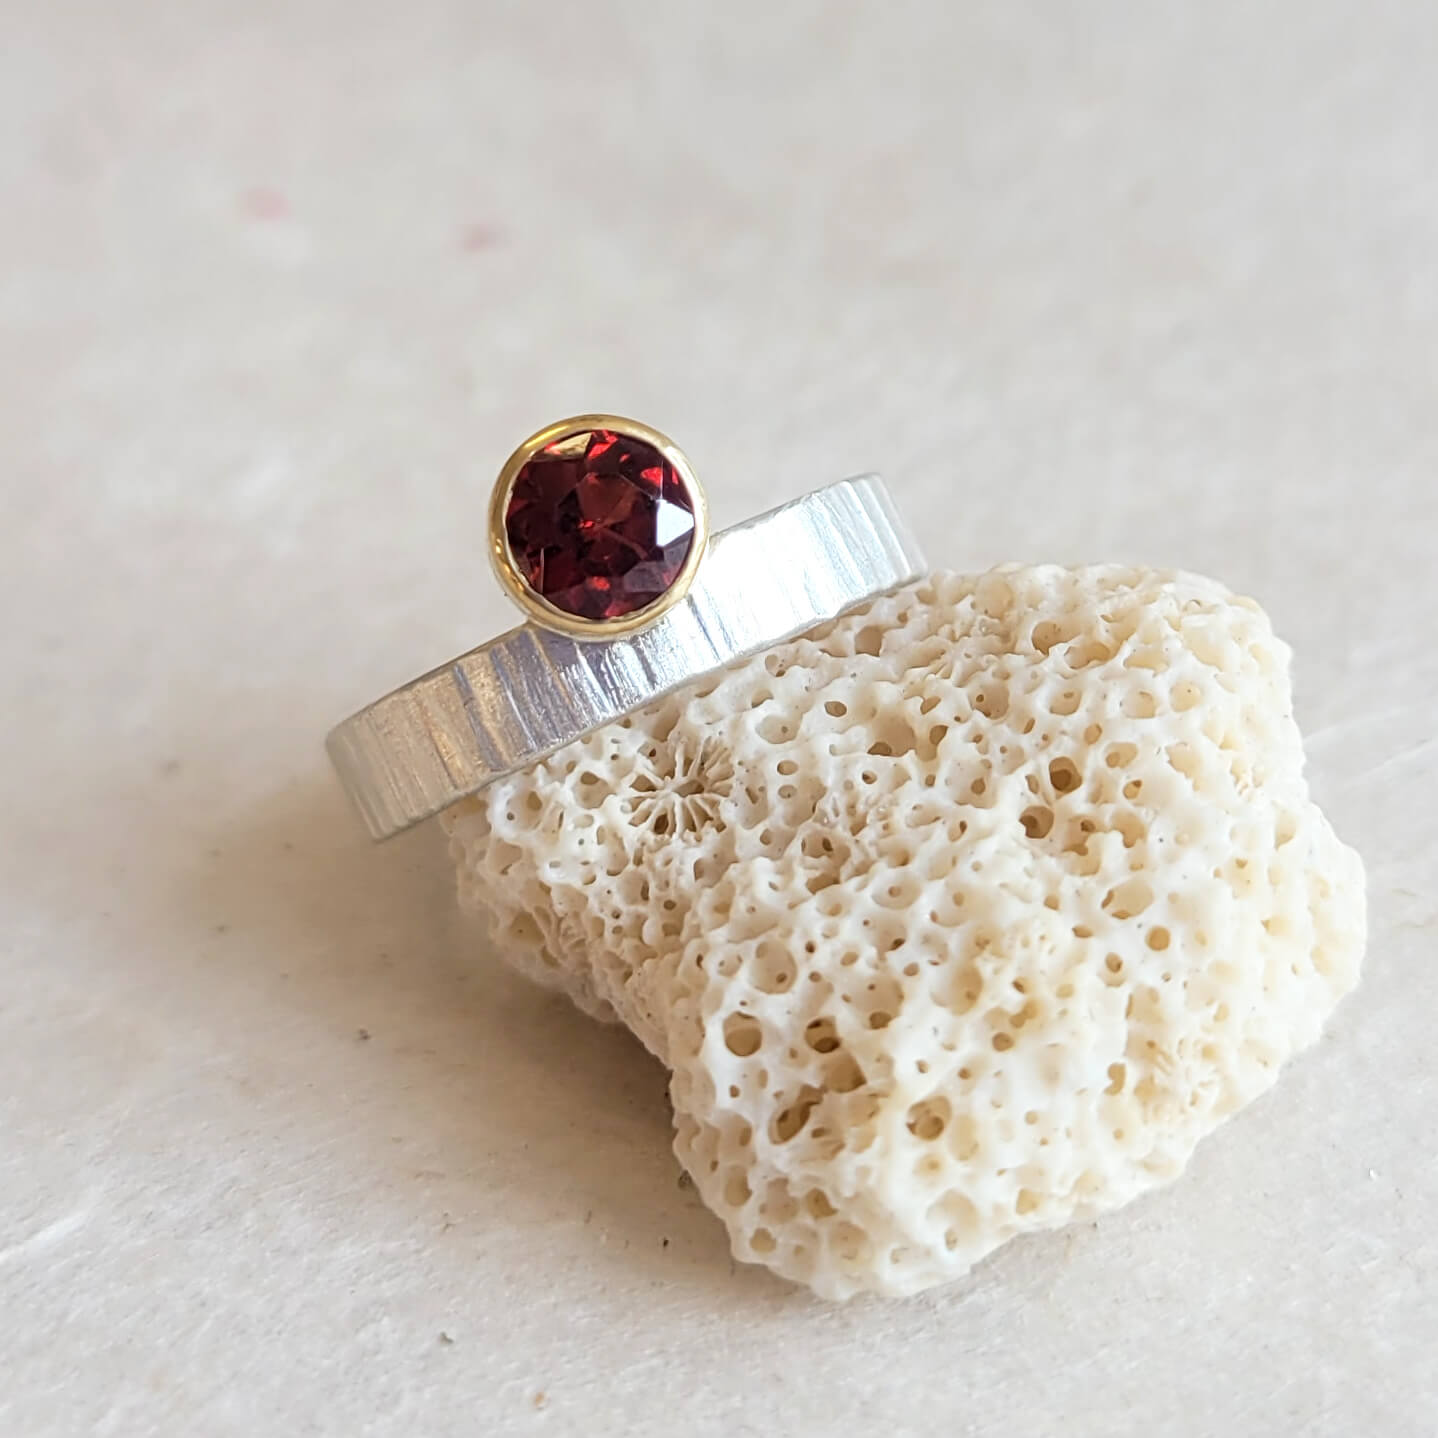 Off-set Ring with Garnet, Gold and Silver